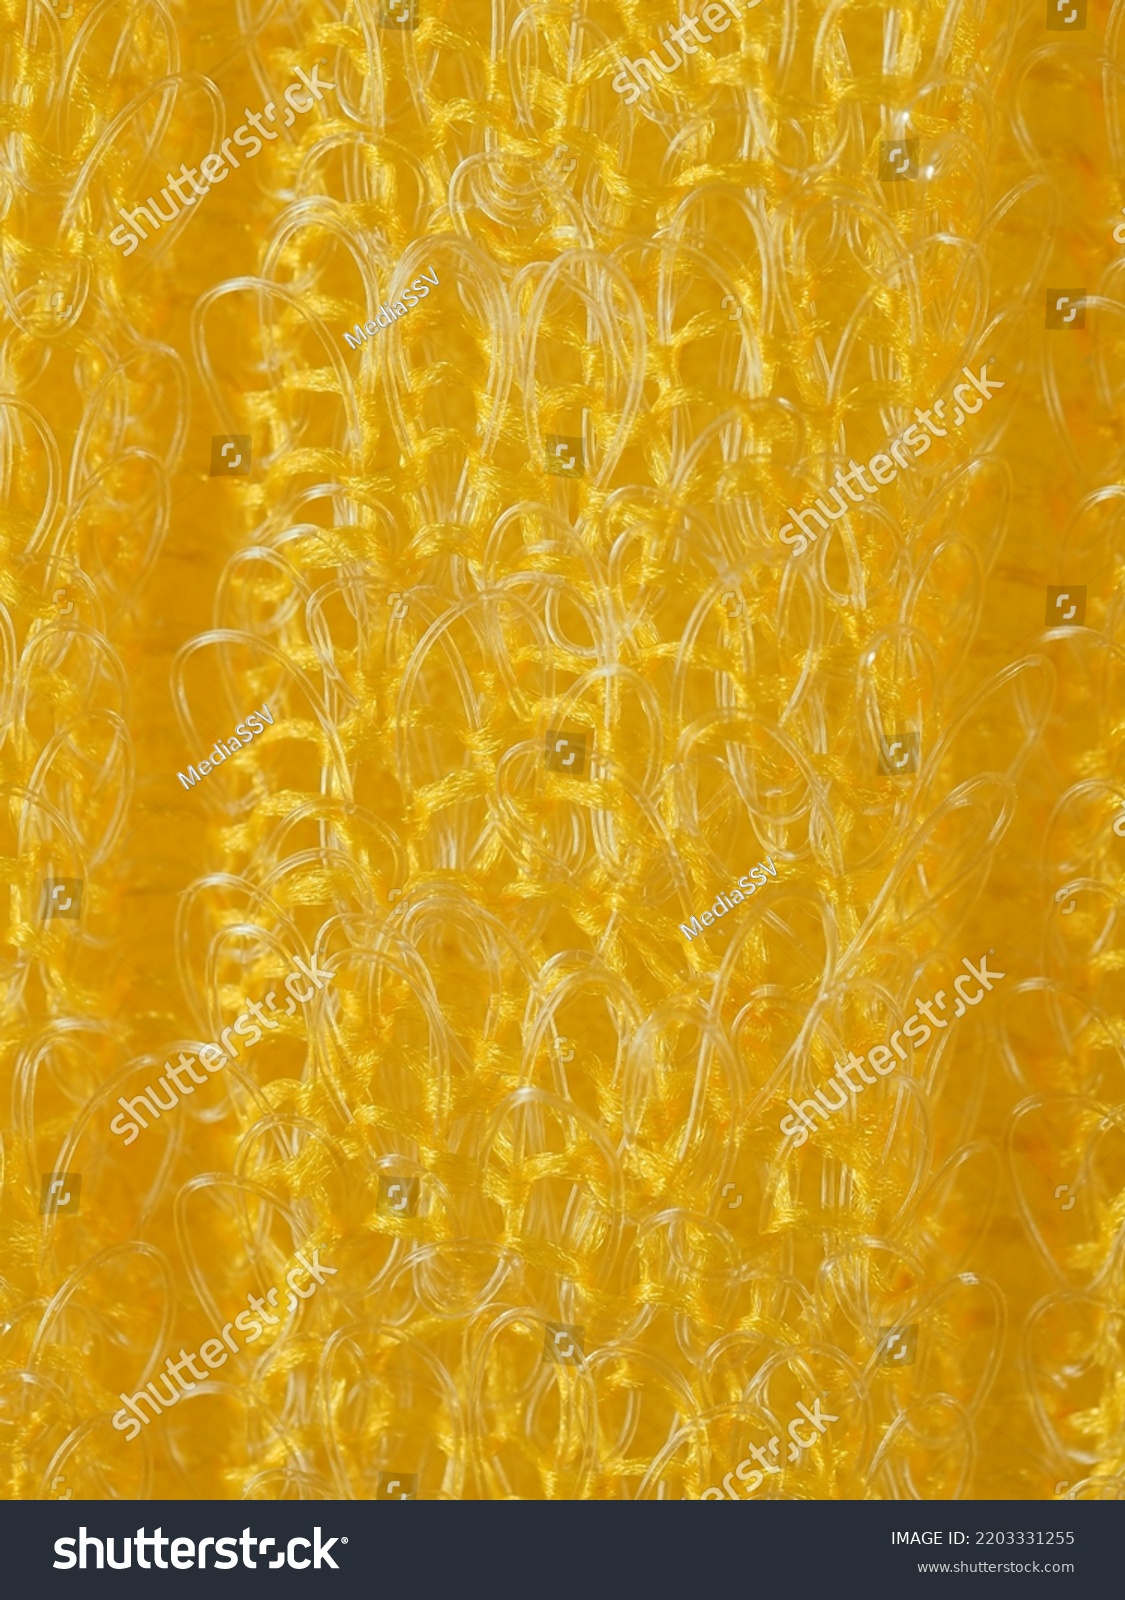 close up, background, texture, large vertical banner. heterogeneous surface structure bright saturated yellow sponge for washing dishes, kitchen, bath. full depth of field. high resolution photo #2203331255